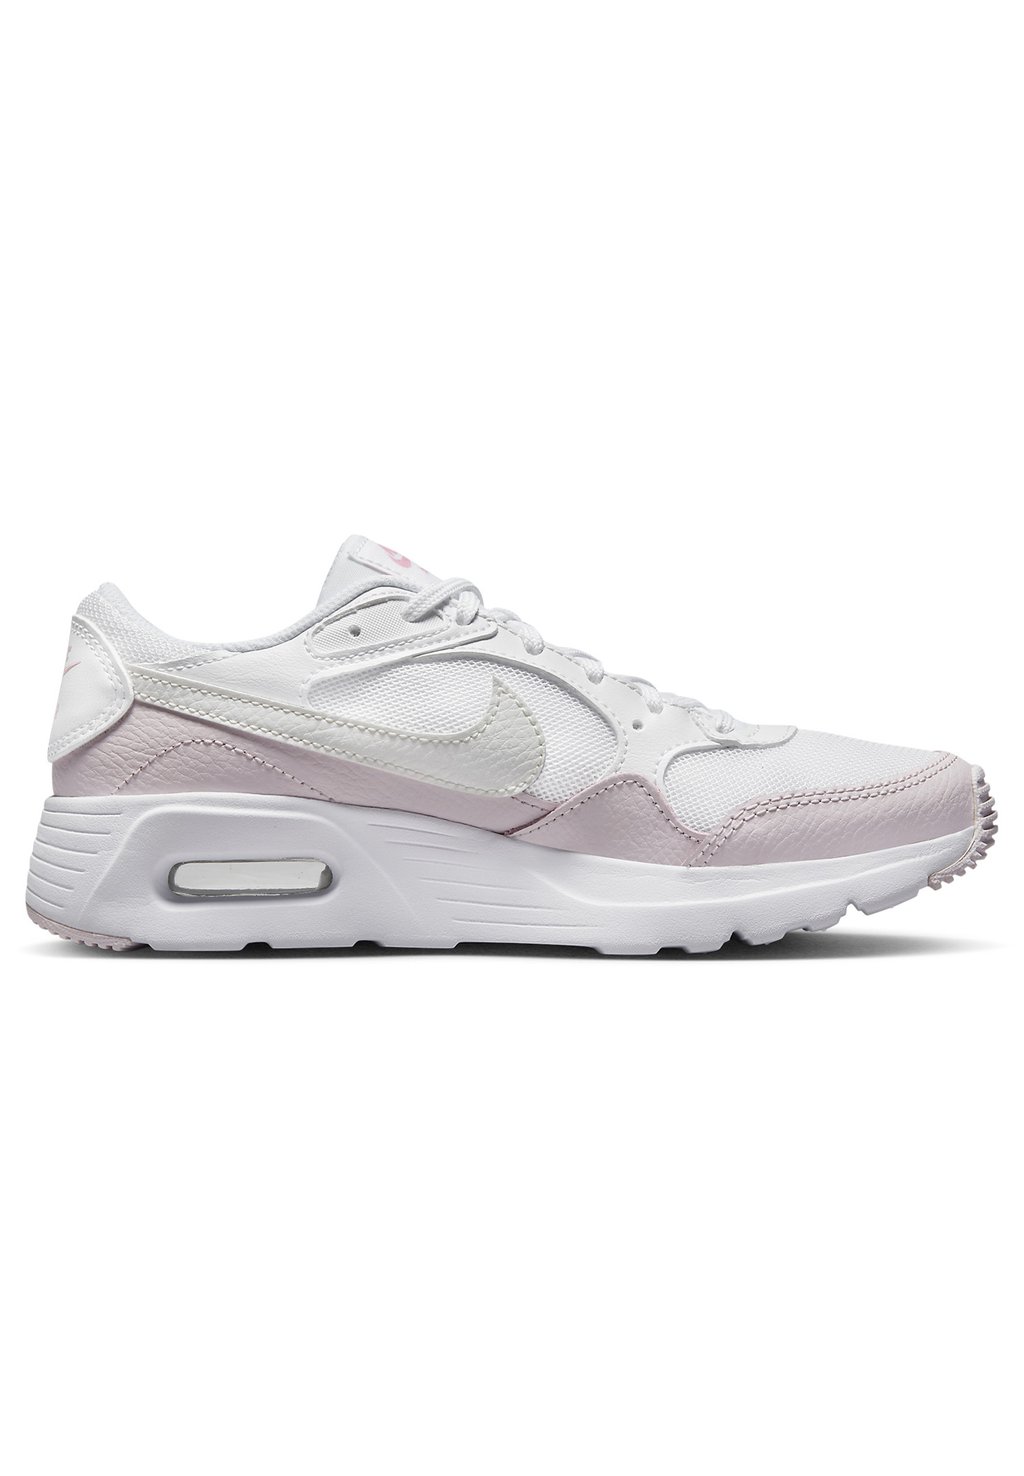 Низкие кроссовки Nike Air Max Sc (Gs) Nike, цвет white/summit white-pearl pink-med soft pink freshwater pearl white button pearl aaa pink purple white button pearl